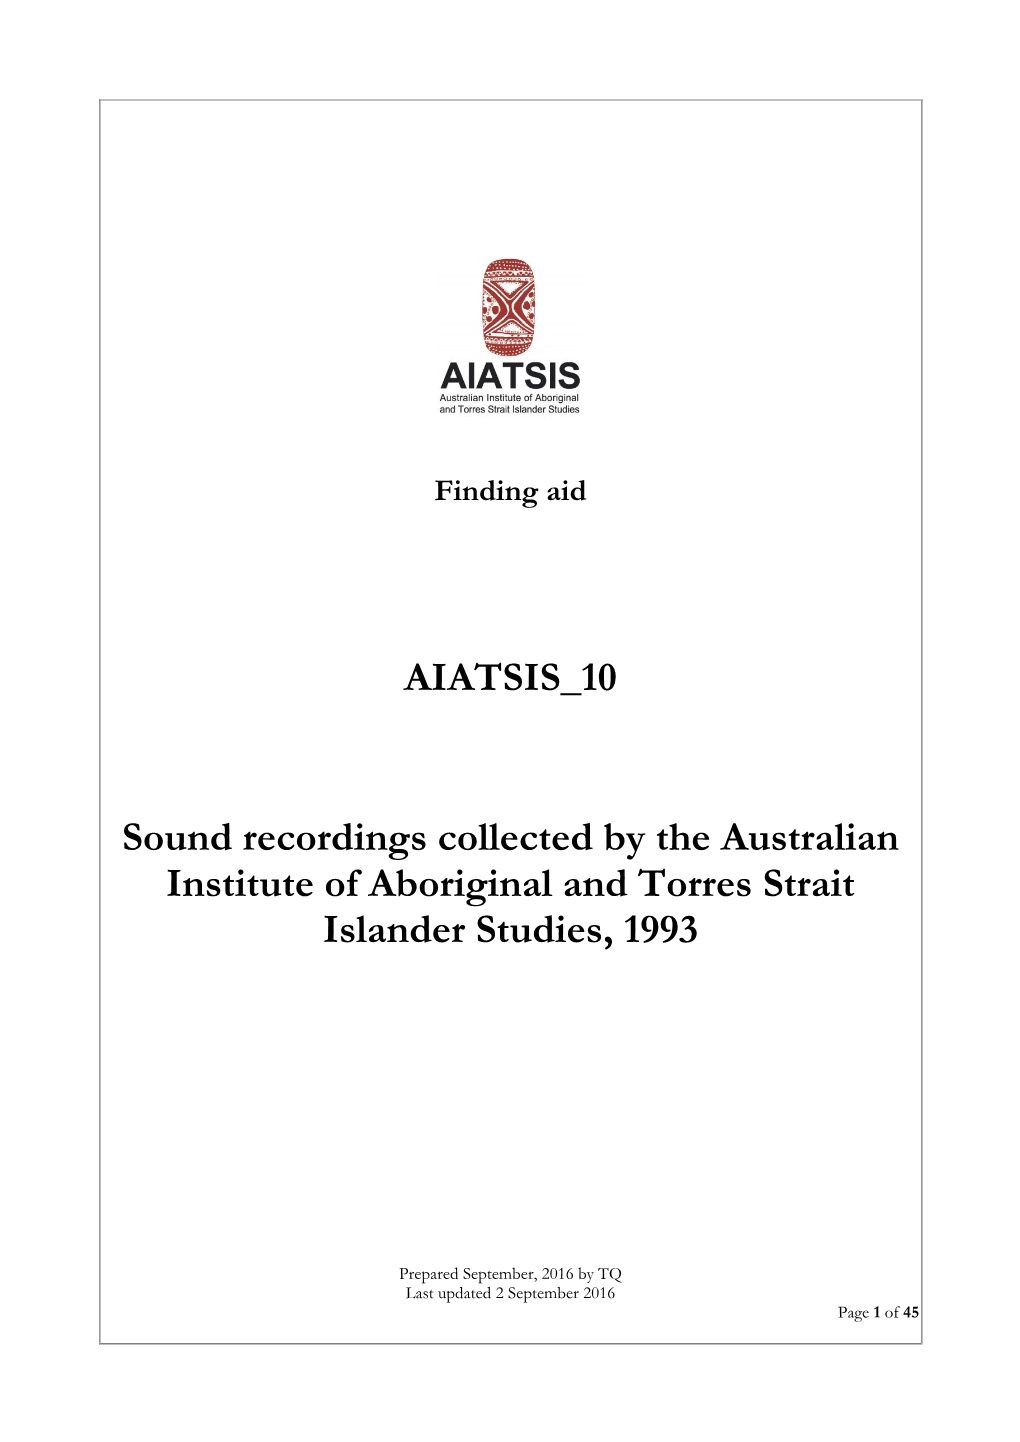 AIATSIS 10 Sound Recordings Collected by the Australian Institute